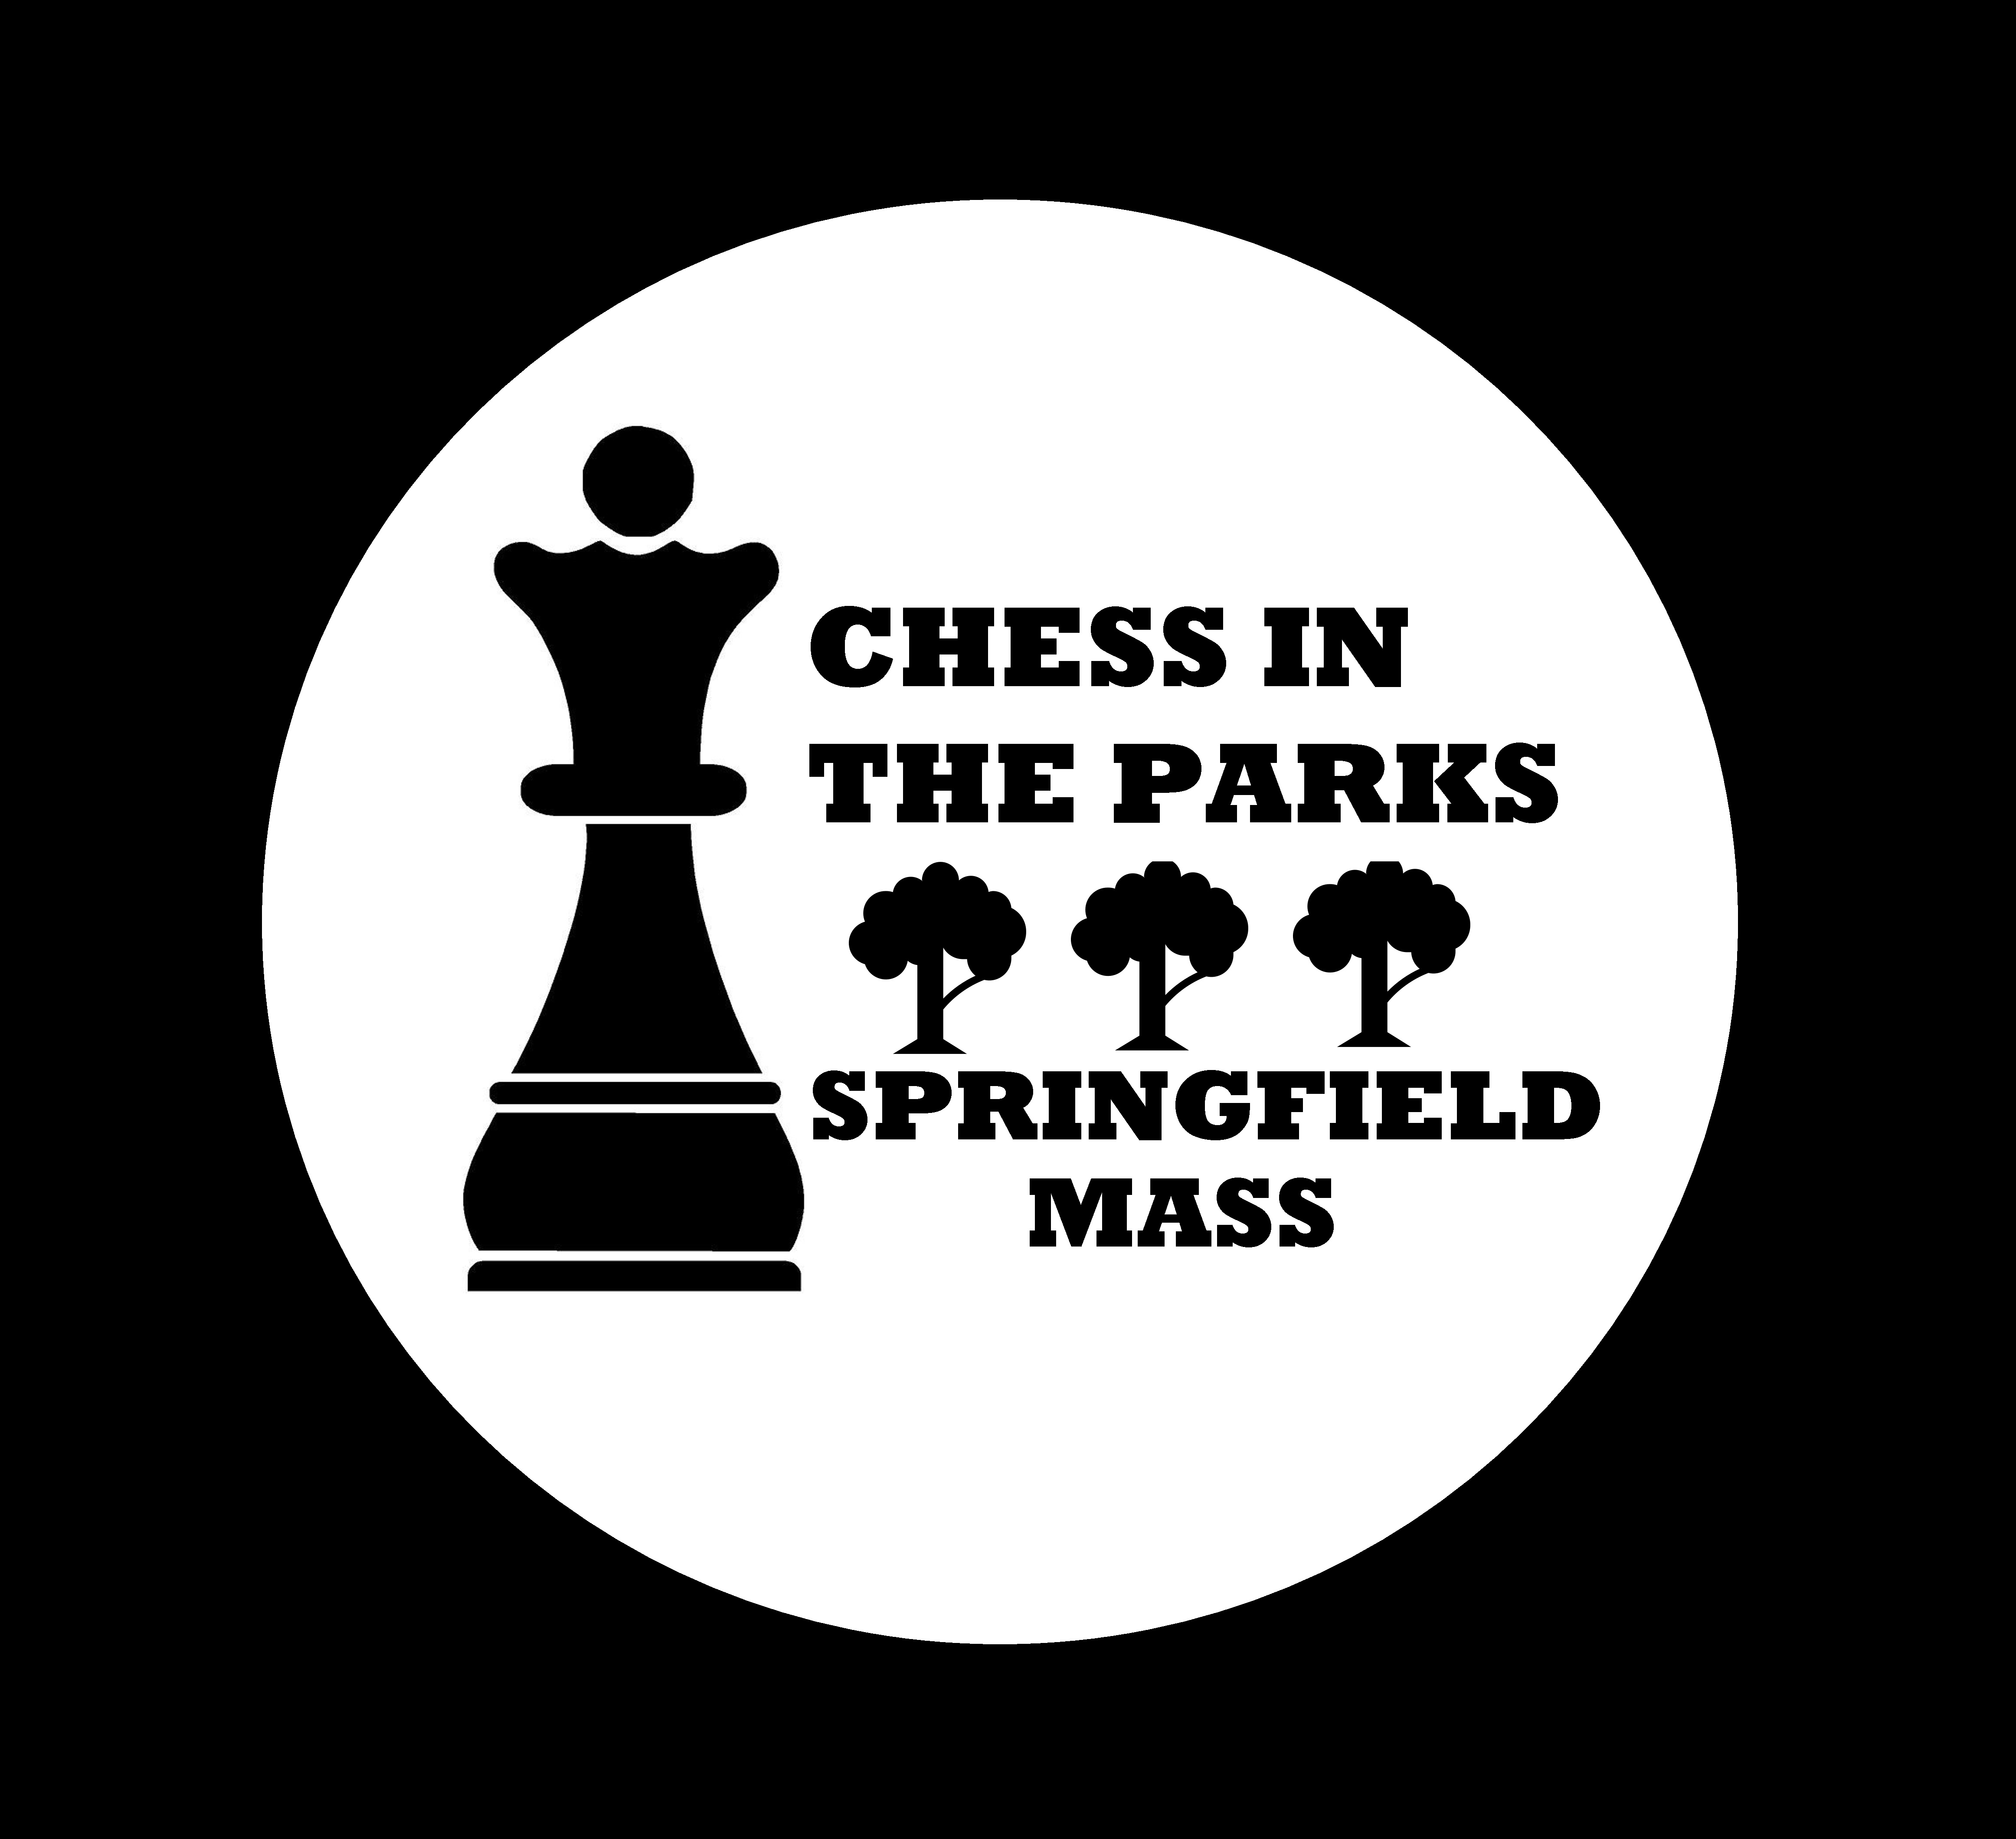 This is how chess is played in Springfield